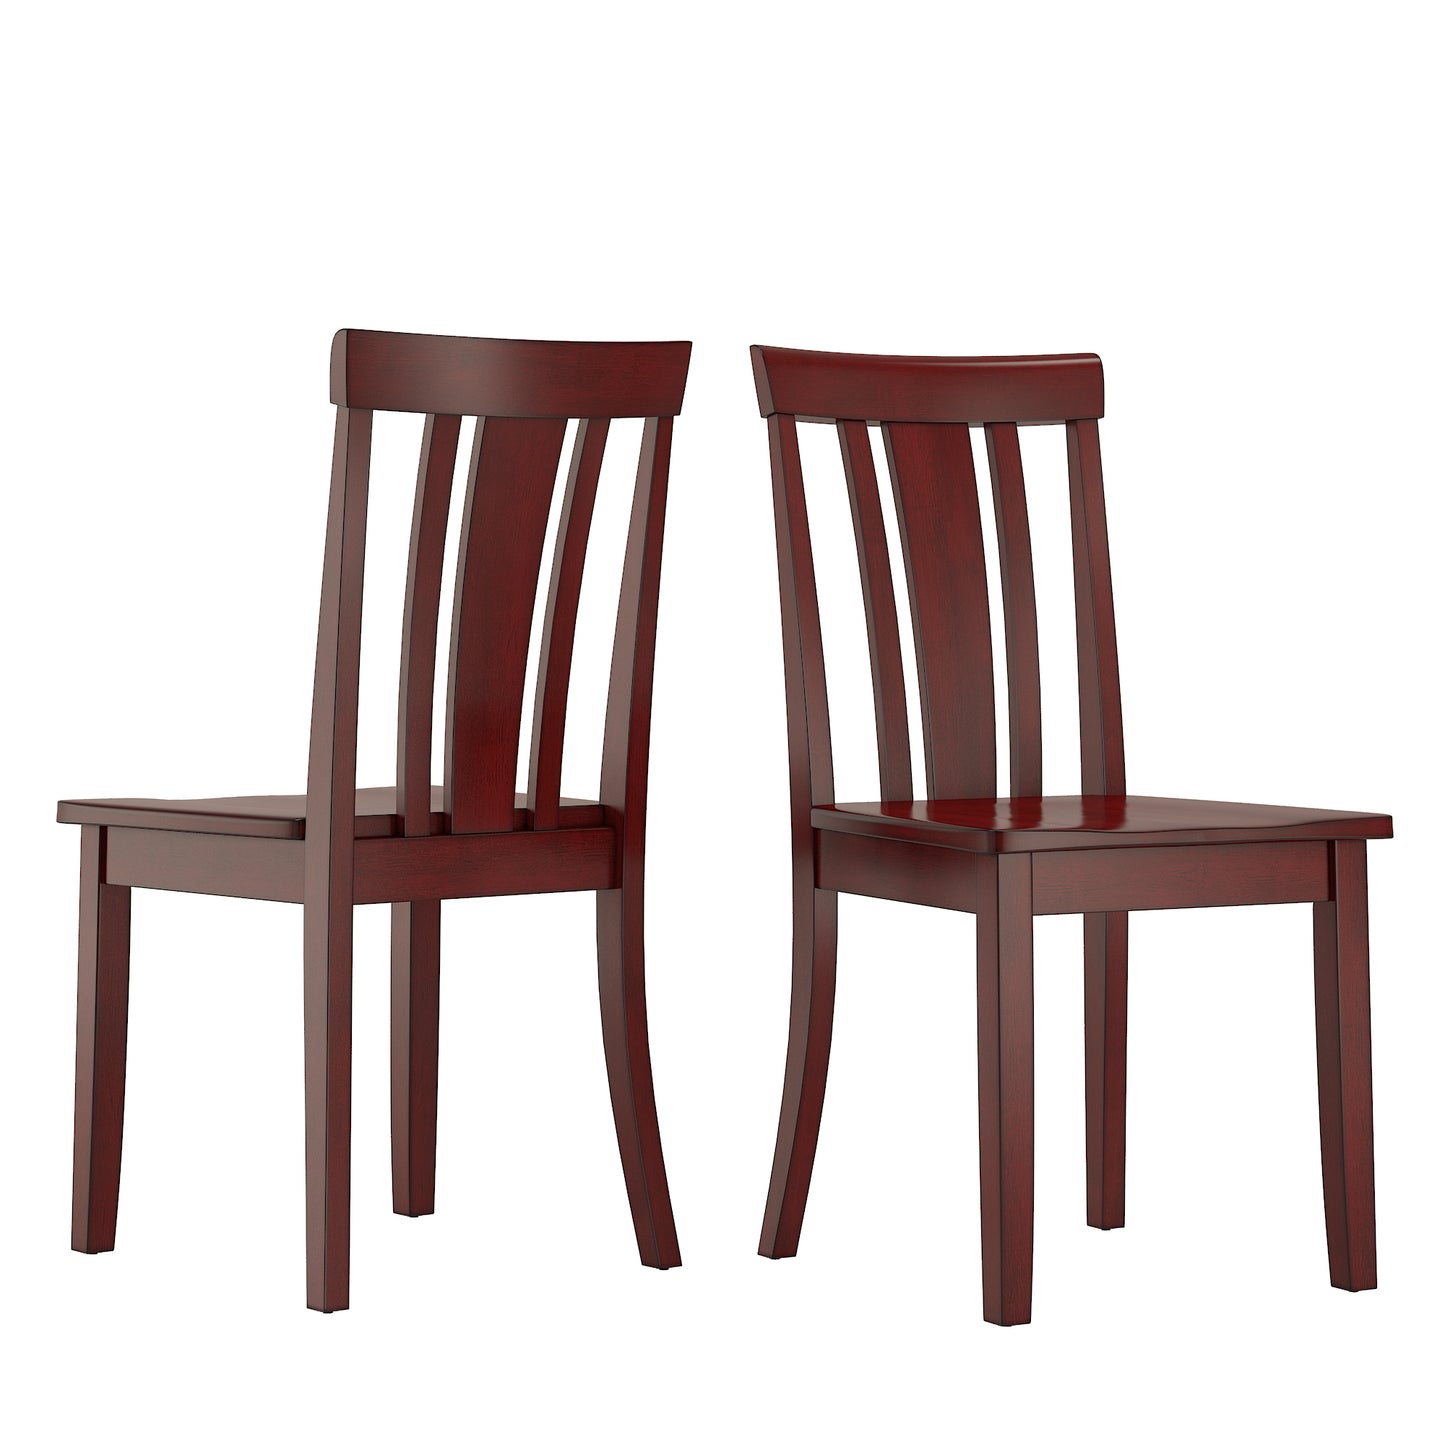 Slat Back Wood Dining Chairs (Set of 2) - Antique Berry Finish